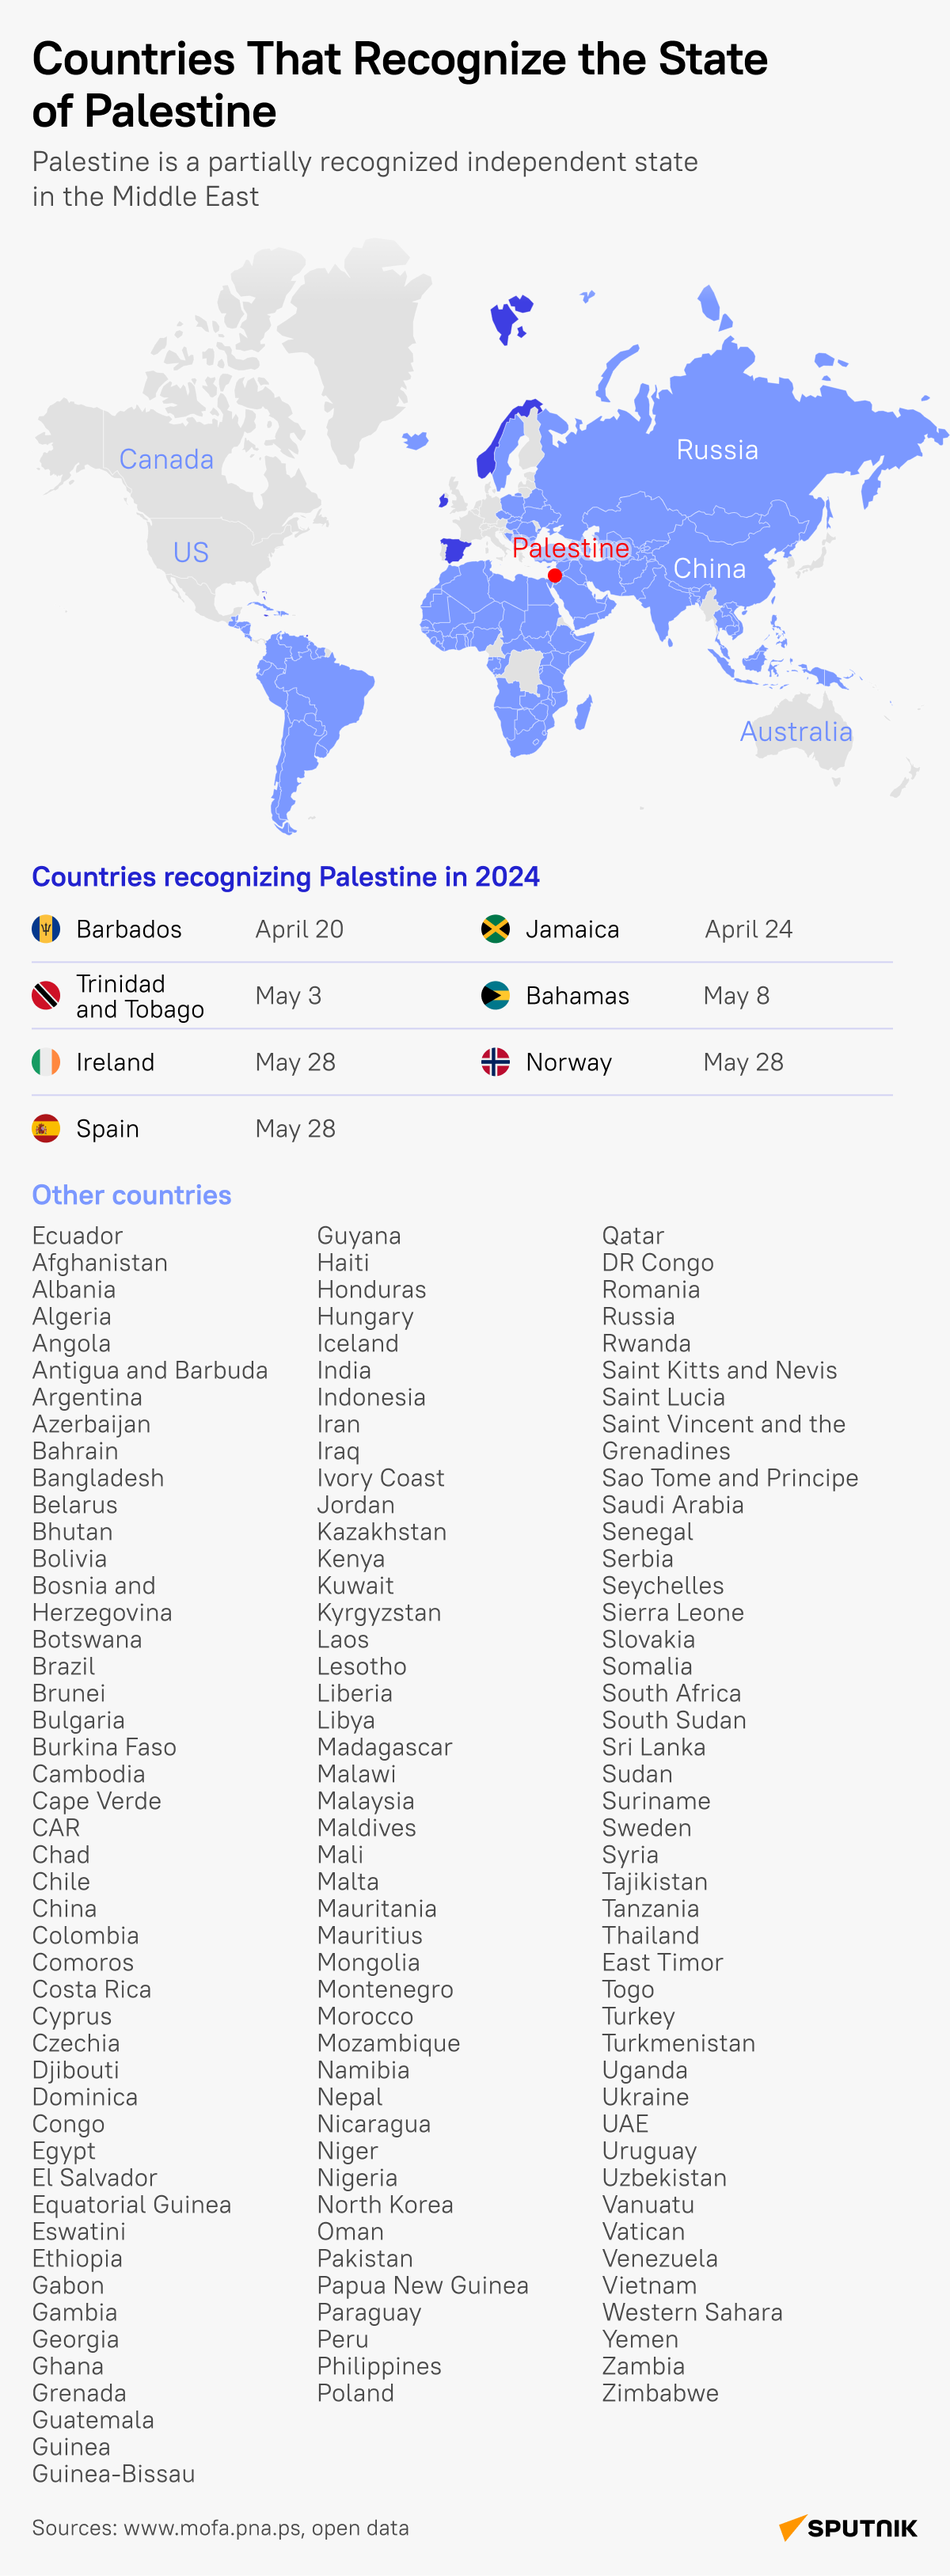 Which Countries Recognize Palestine?